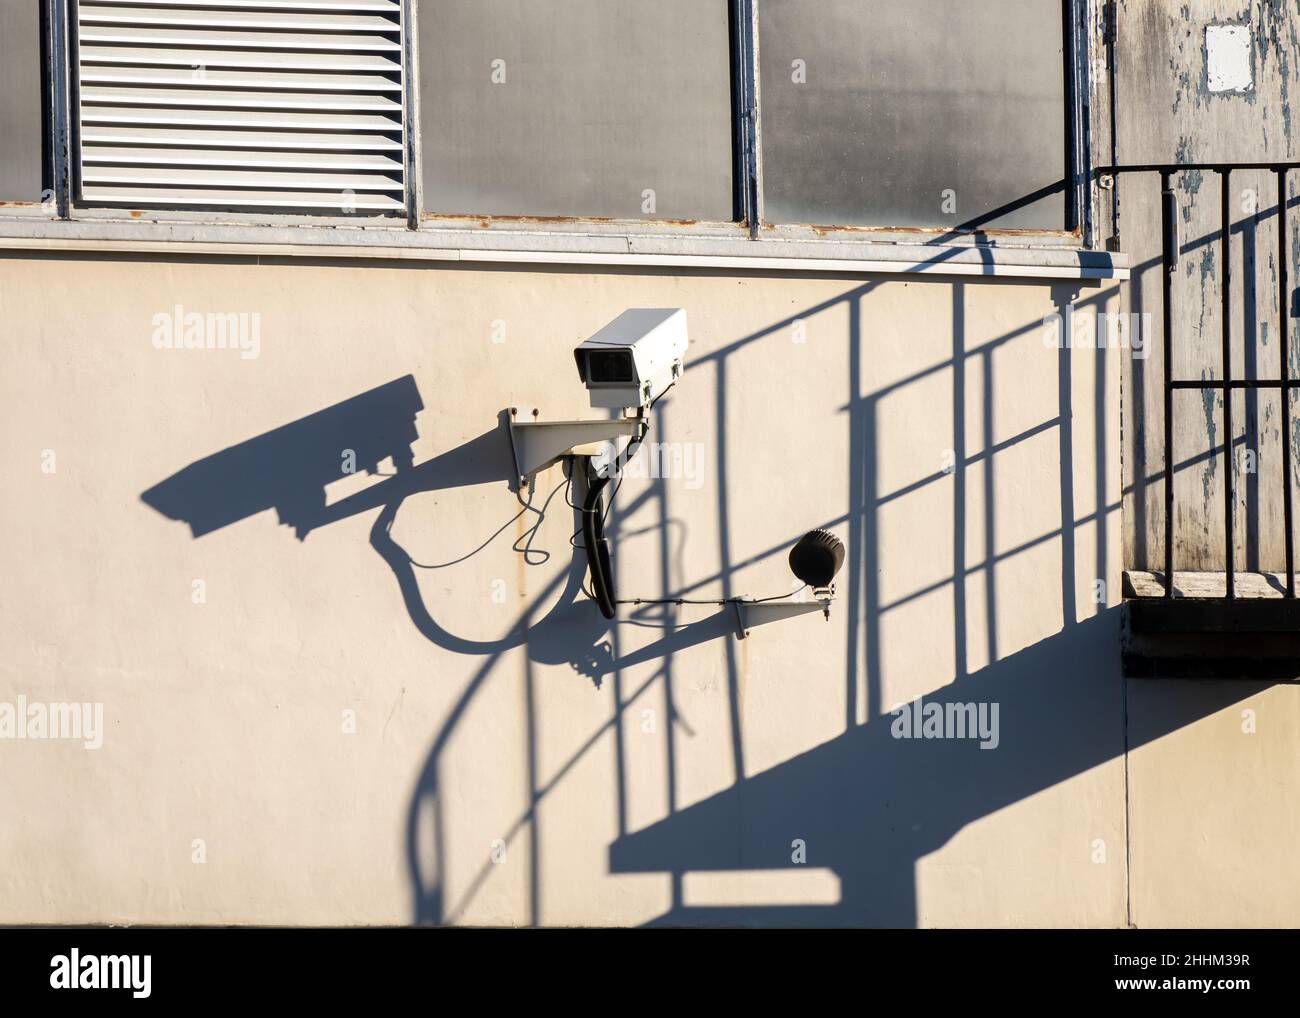 CCTV professional camera looking out with shadow cast on building wall. High security area with closed circuit television camera, stairway industrial Stock Photo